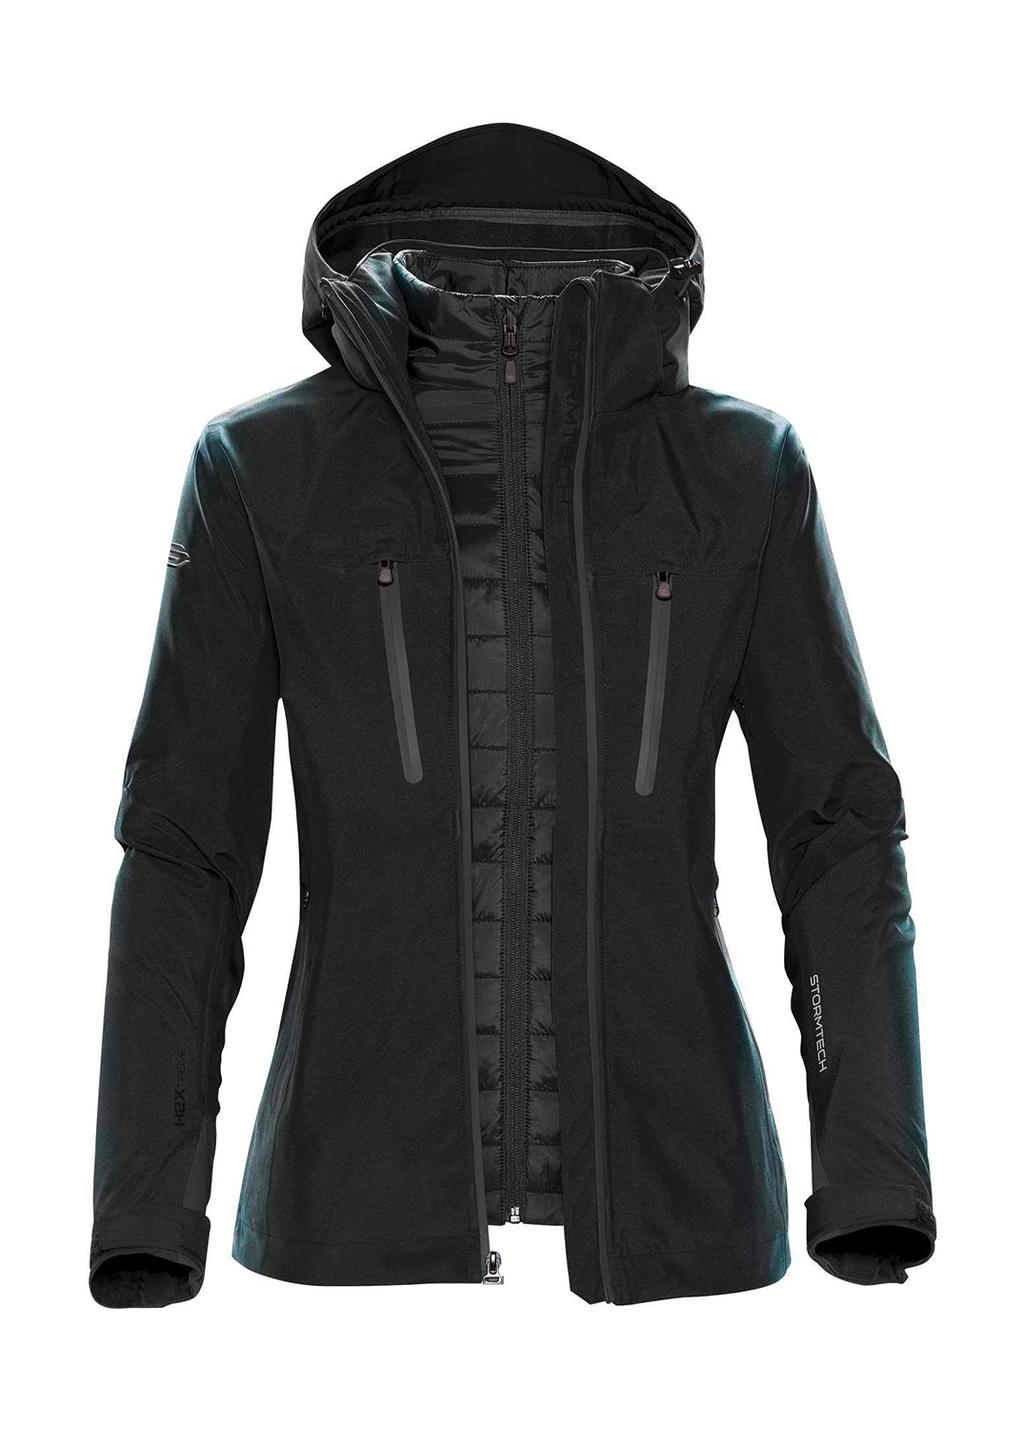  Womens Matrix System Jacket in Farbe Black/Carbon